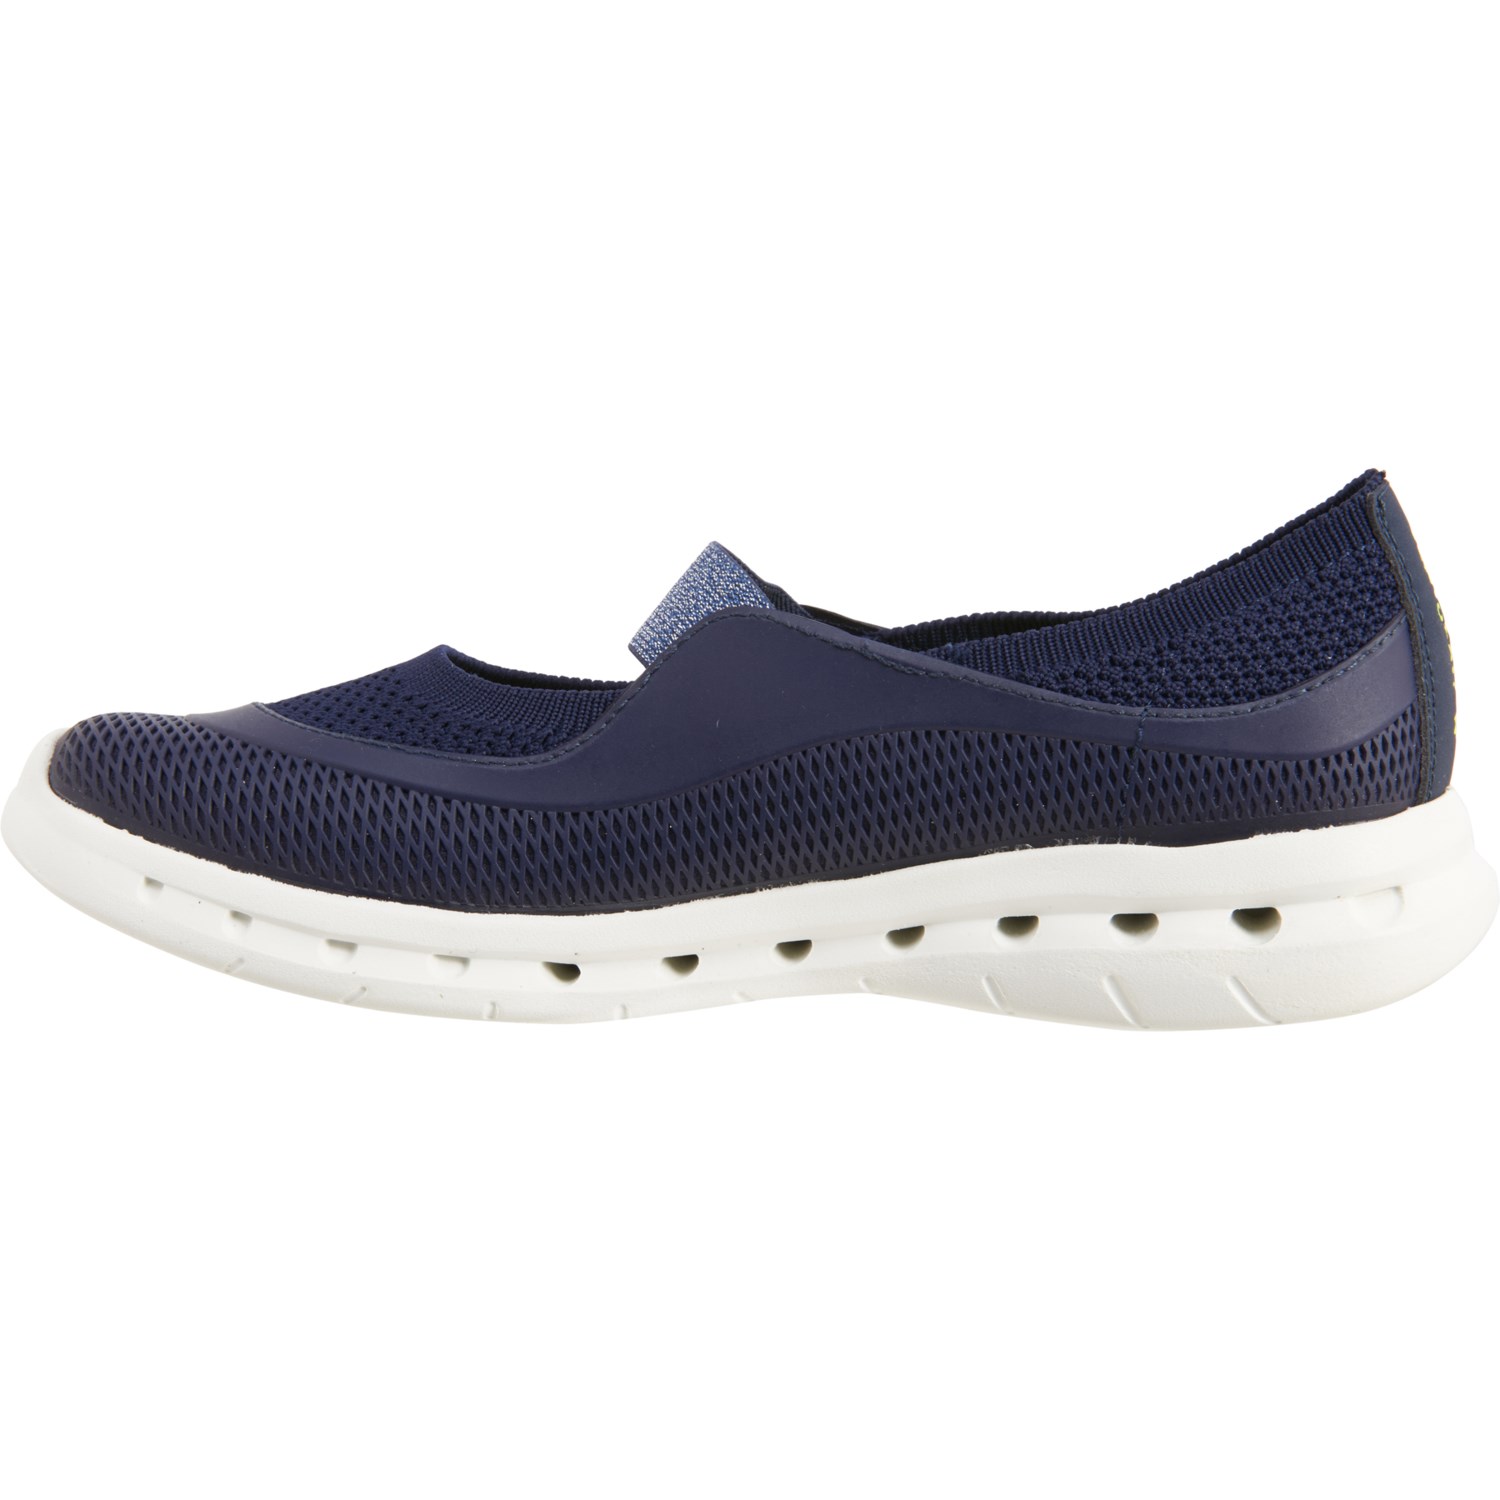 VENTOLATION Emily Water Shoes (For Women) - Save 75%